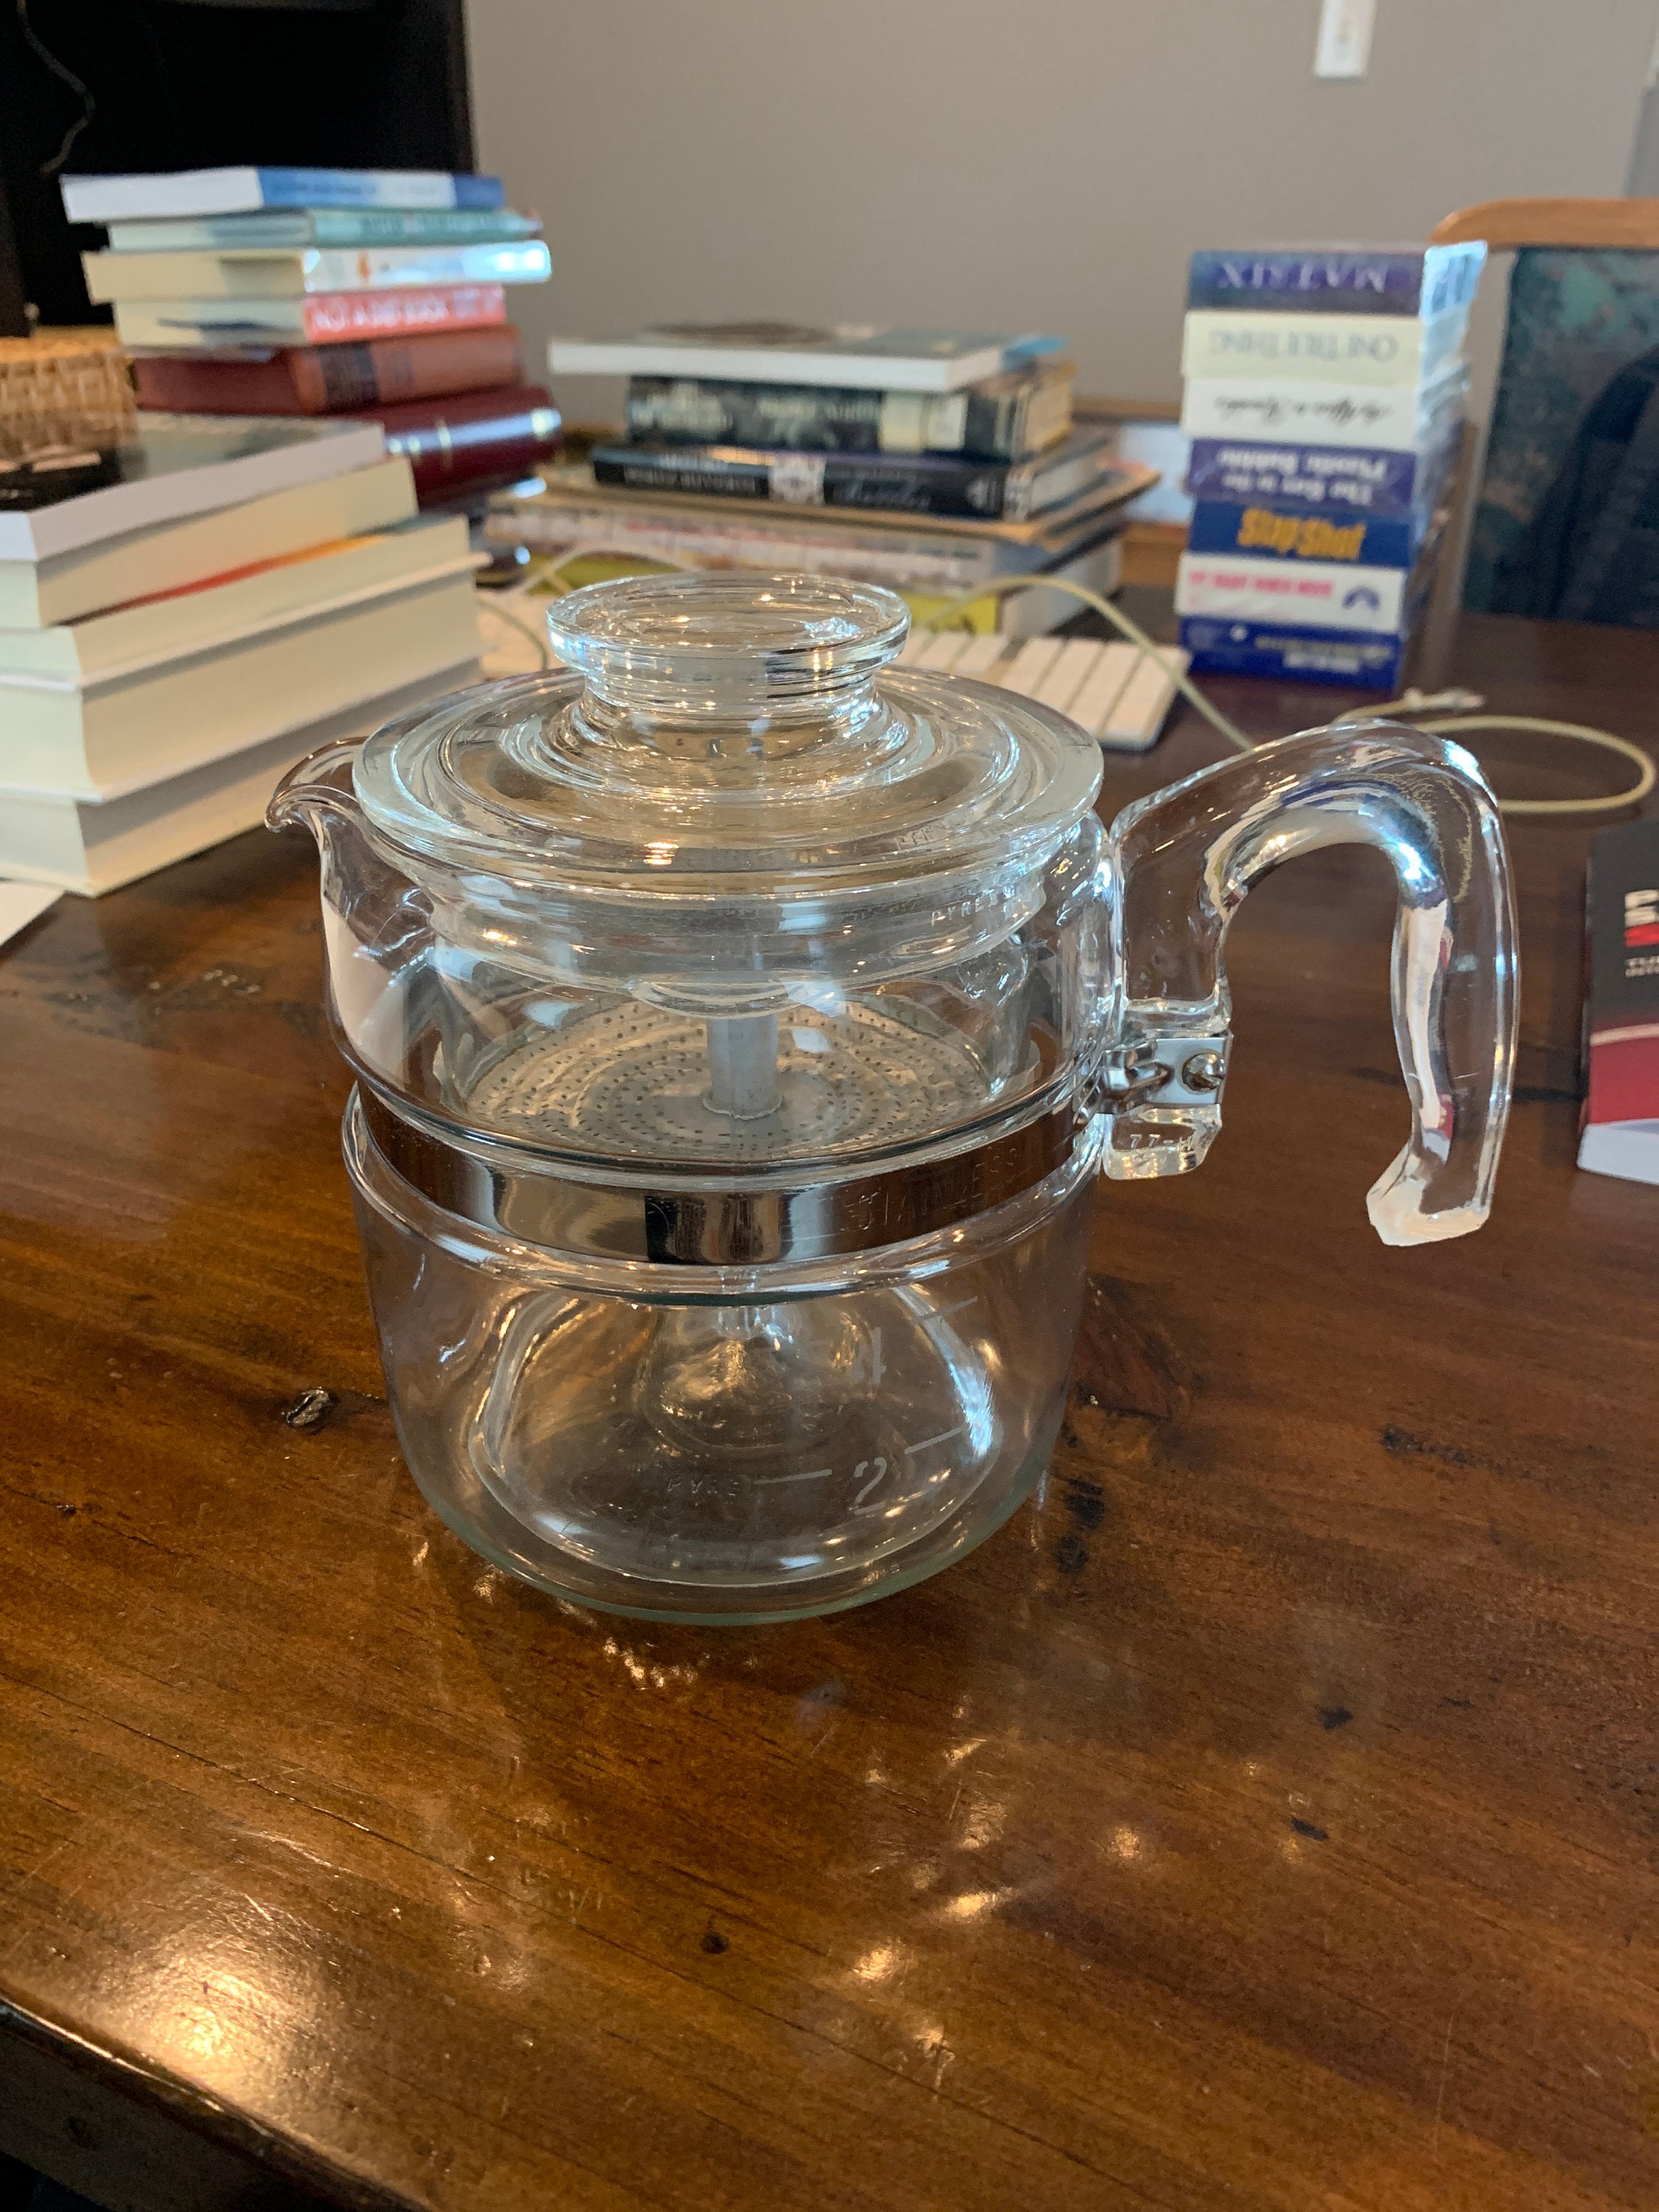 PYREX Flameware 4 Cup Glass Coffee Pot Coffee Percolator All Parts 7754  Vintage Coffee Carafe Retro by Corning Tea Pot Teapot 